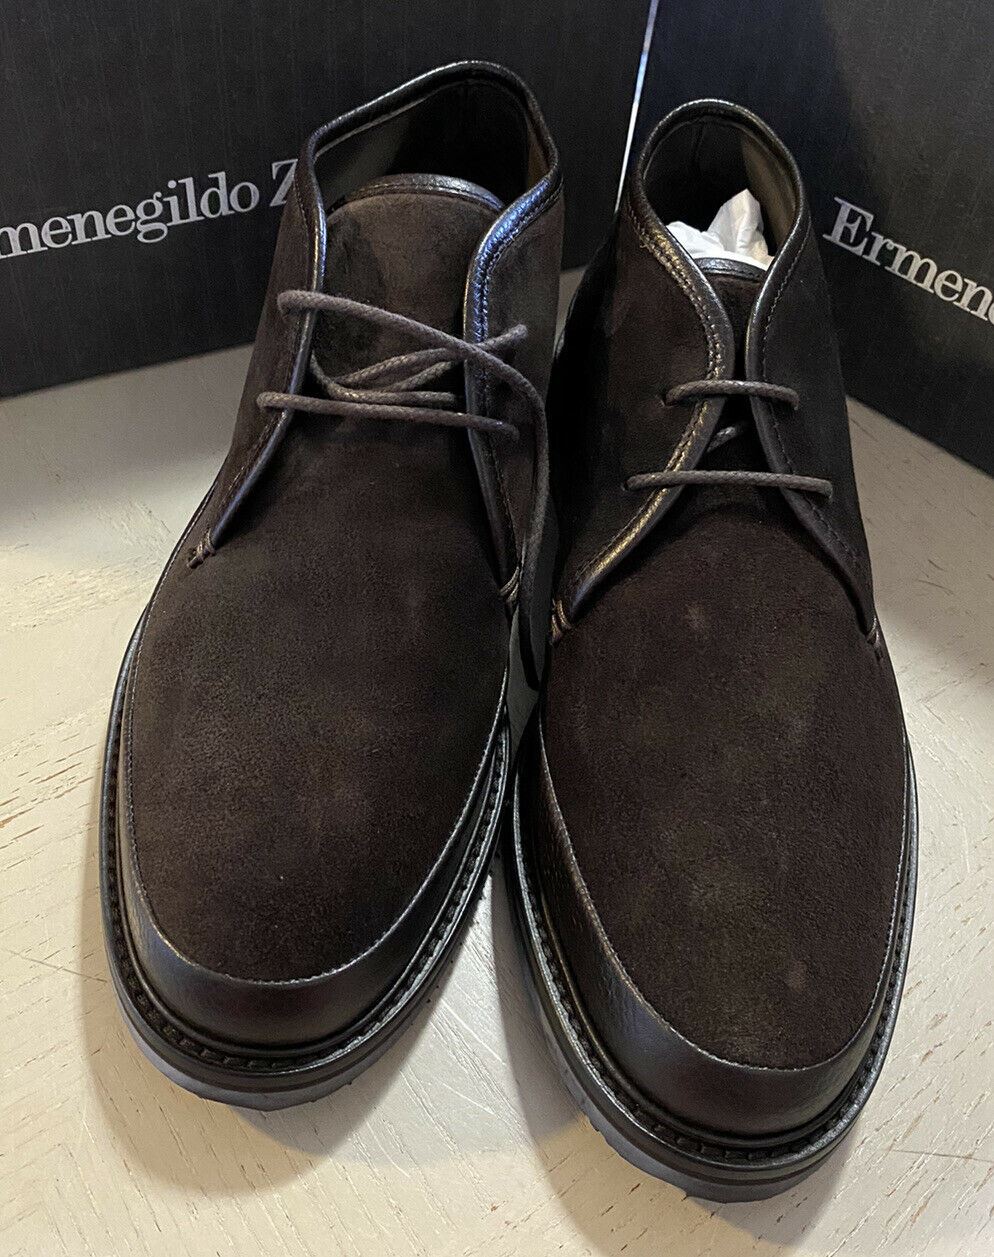 New $650 Ermenegildo Zegna Suede/Leather Boots Shoes DK Brown 9 US Italy